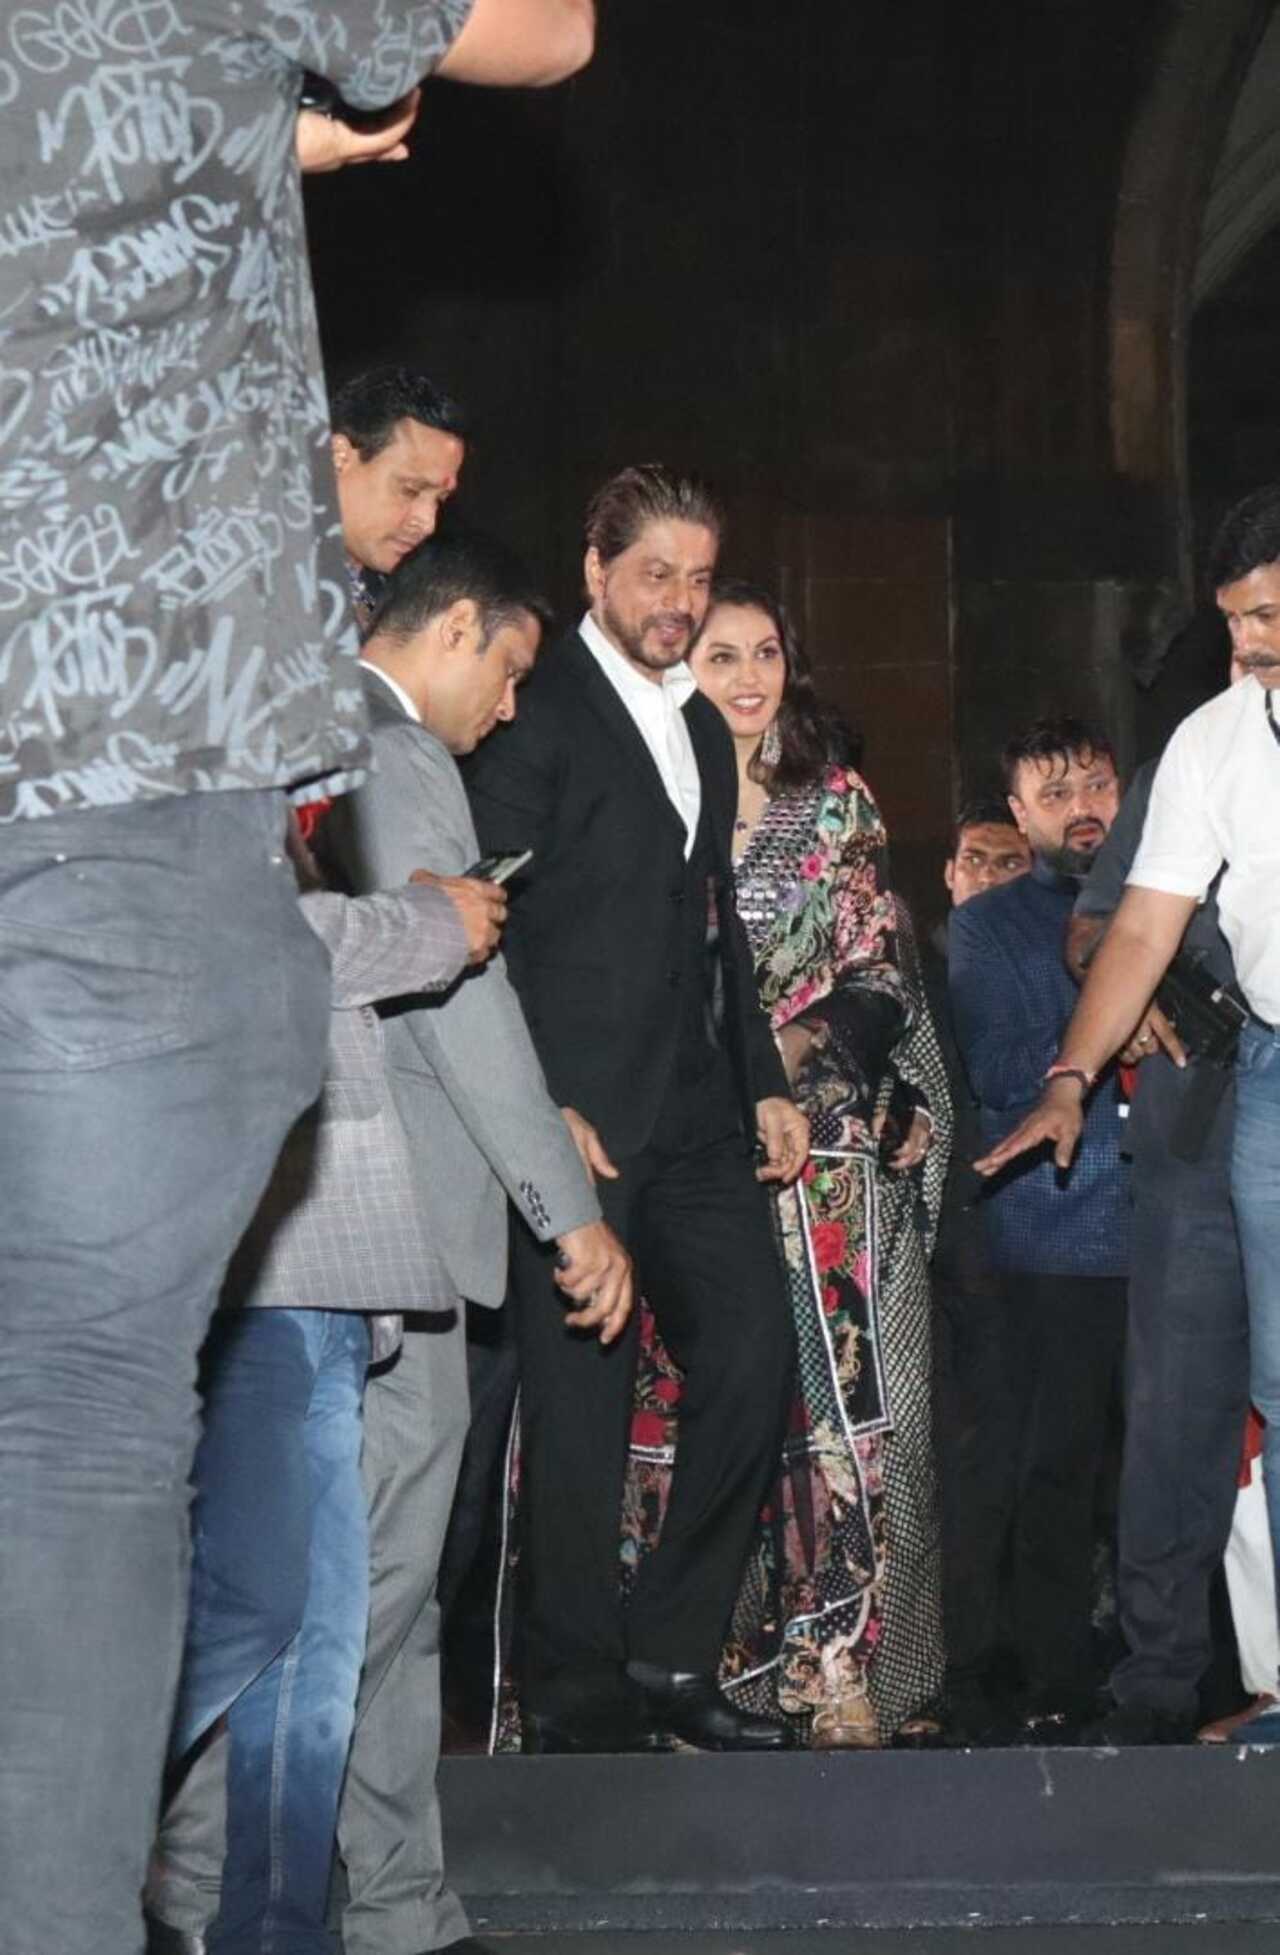 Shah Rukh Khan arrived for the event dressed in a black suit along with his manager Pooja Dadlani